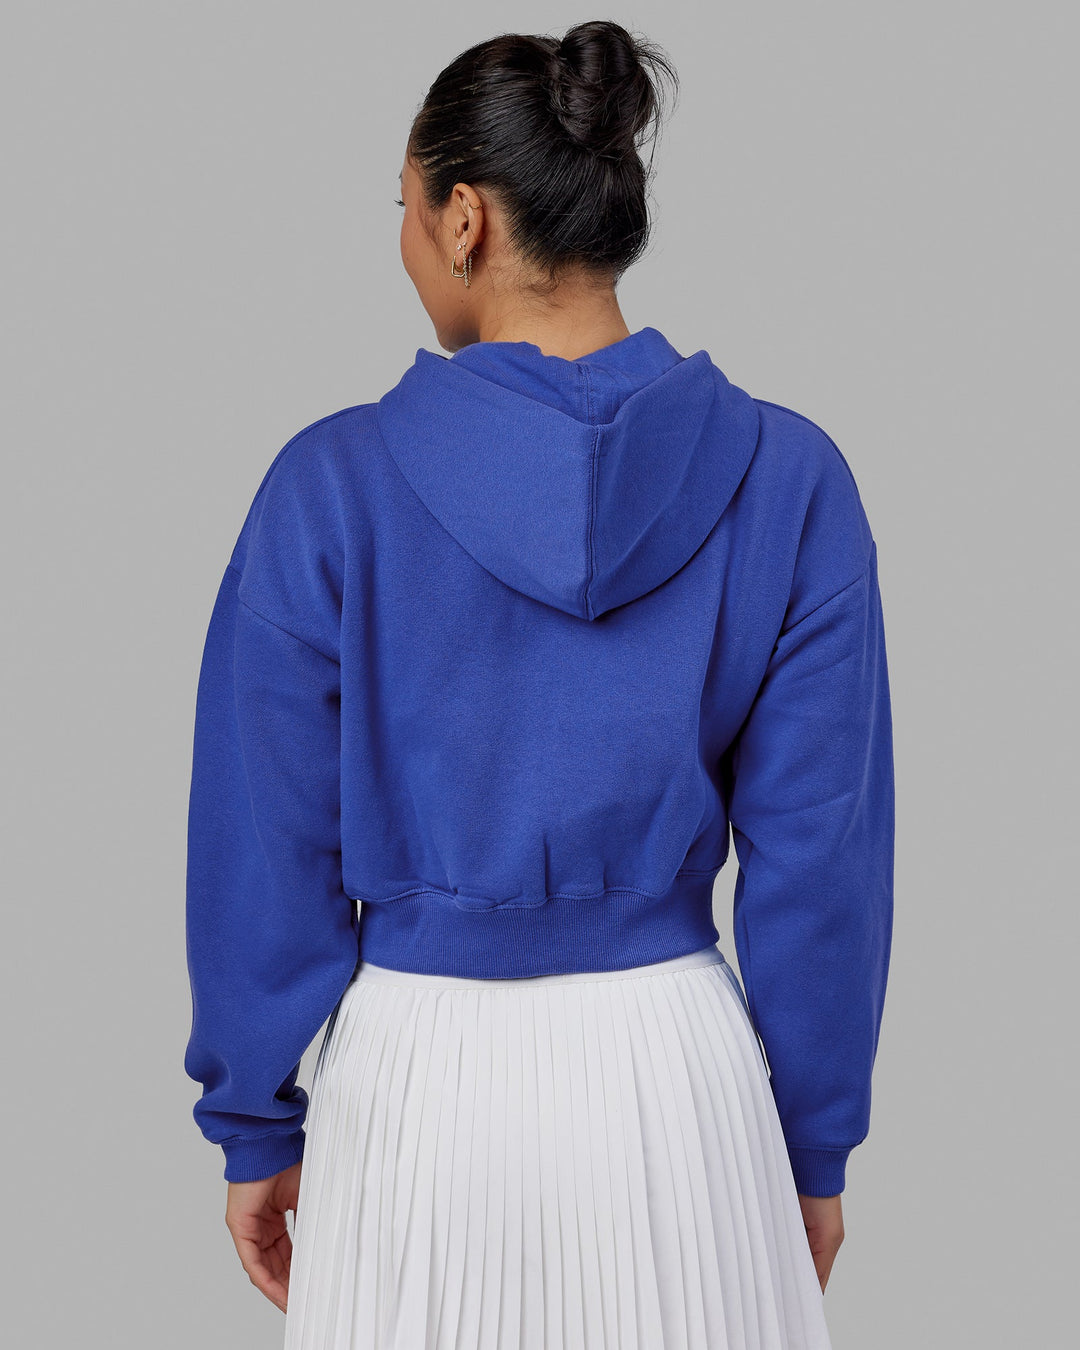 Guild Cropped Hoodie - Power Cobalt-White